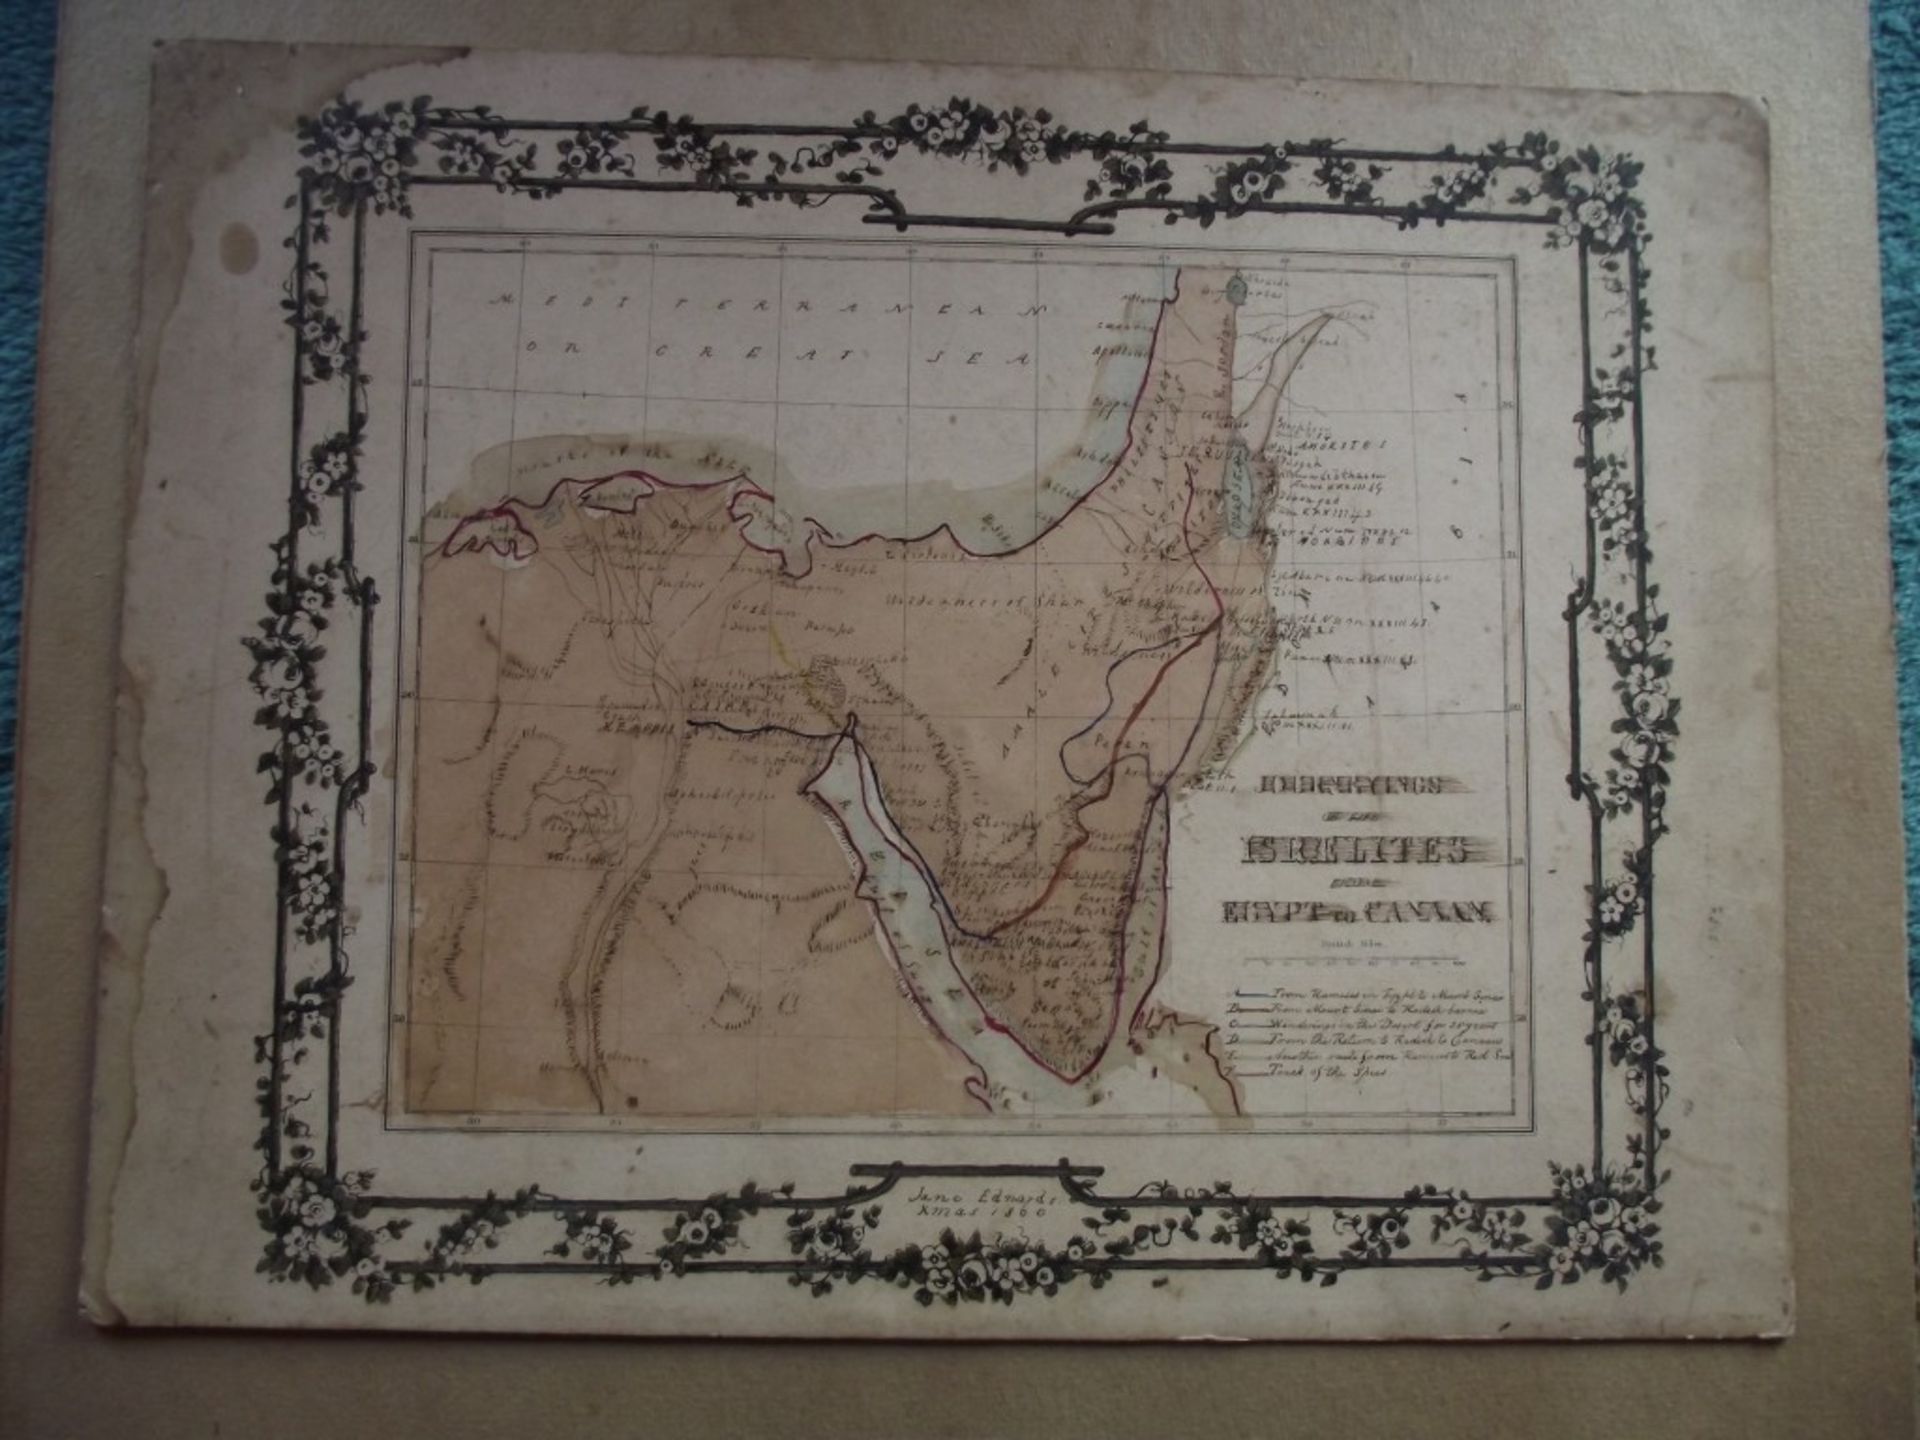 2 x 19th Century Hand Drawn Maps - Signed & Dated By Jane Edwards 1860 - Image 34 of 34